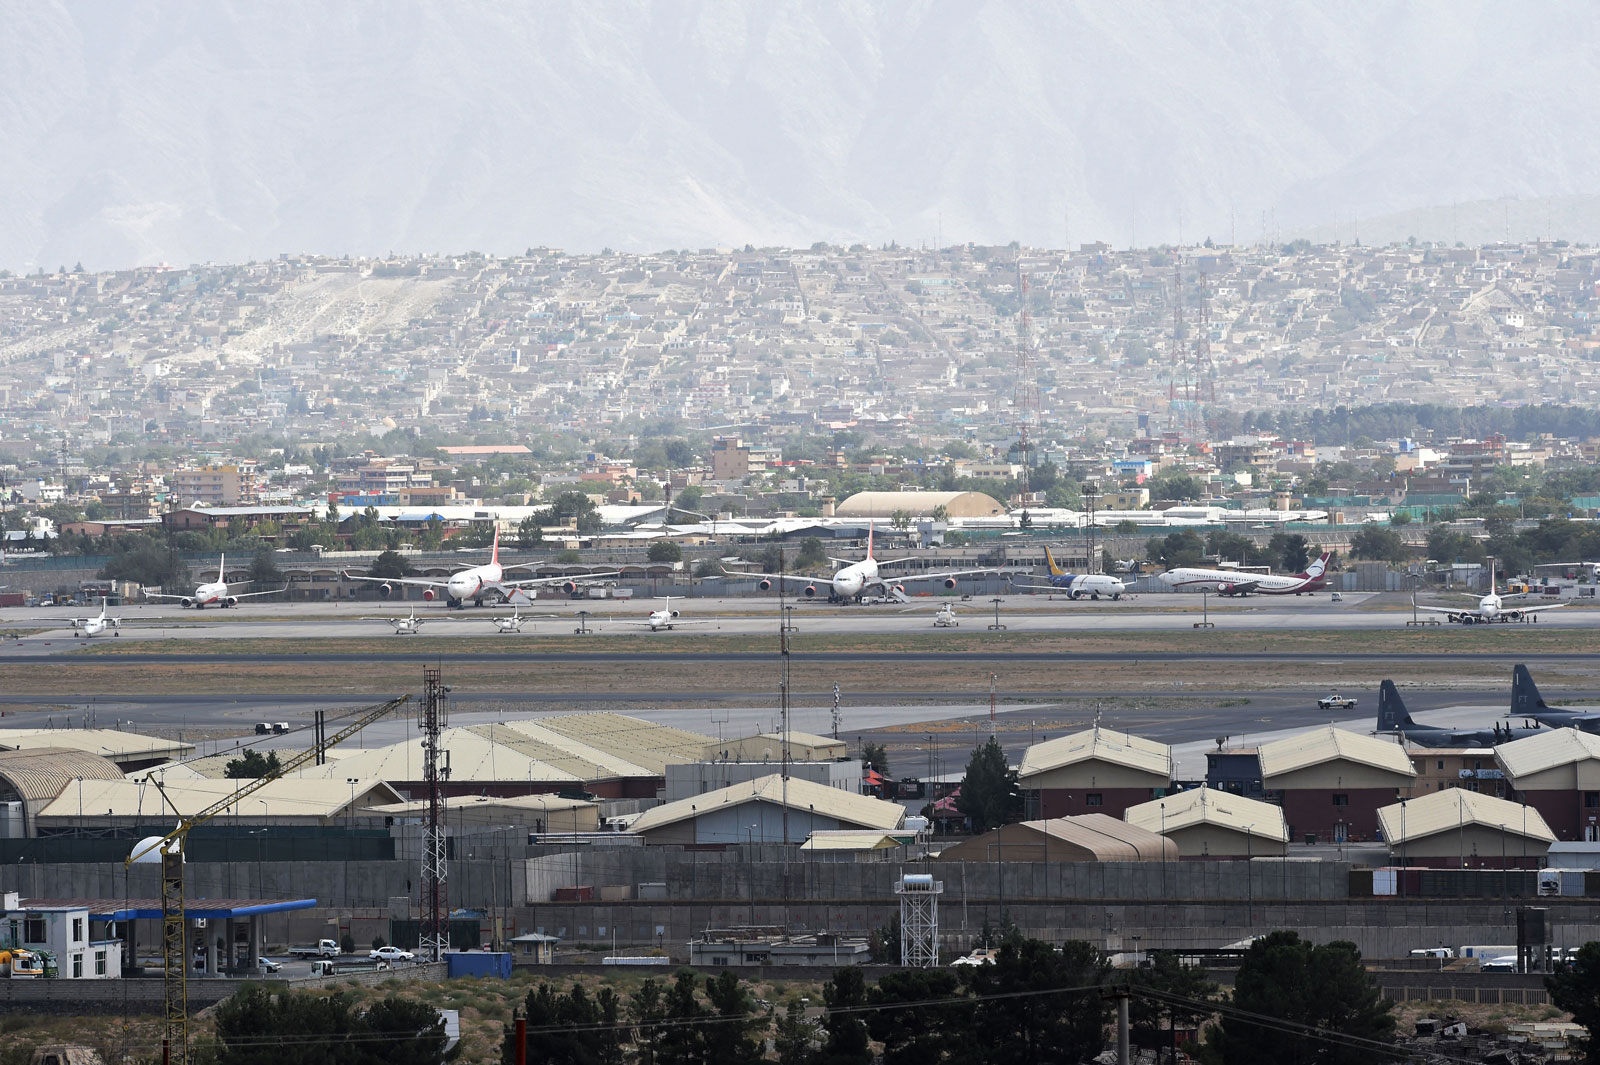 Aircraft are seen on the tarmac of Hamid Karzai International Airport in Kabul on August 14.